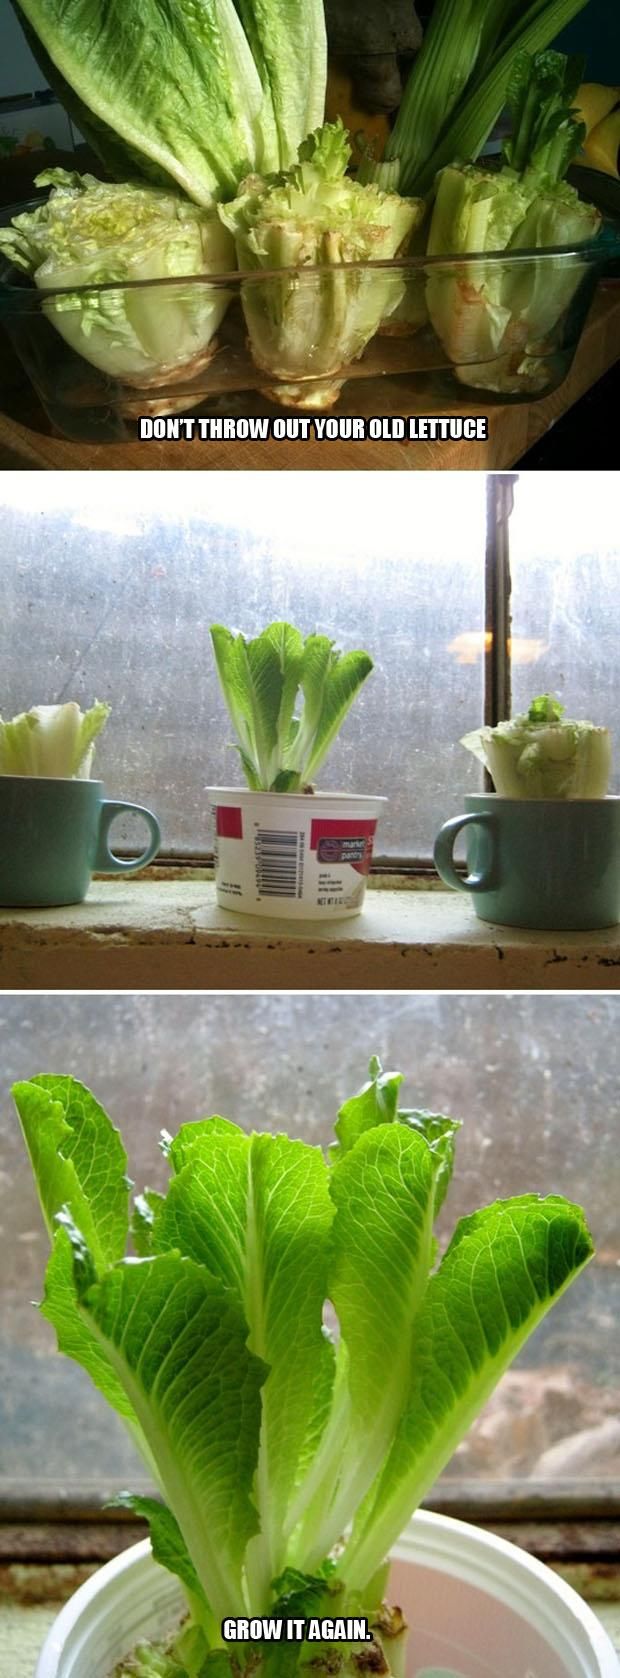 How to regrow lettuce -   Amazingly simple but genius ideas to use and reuse stuff